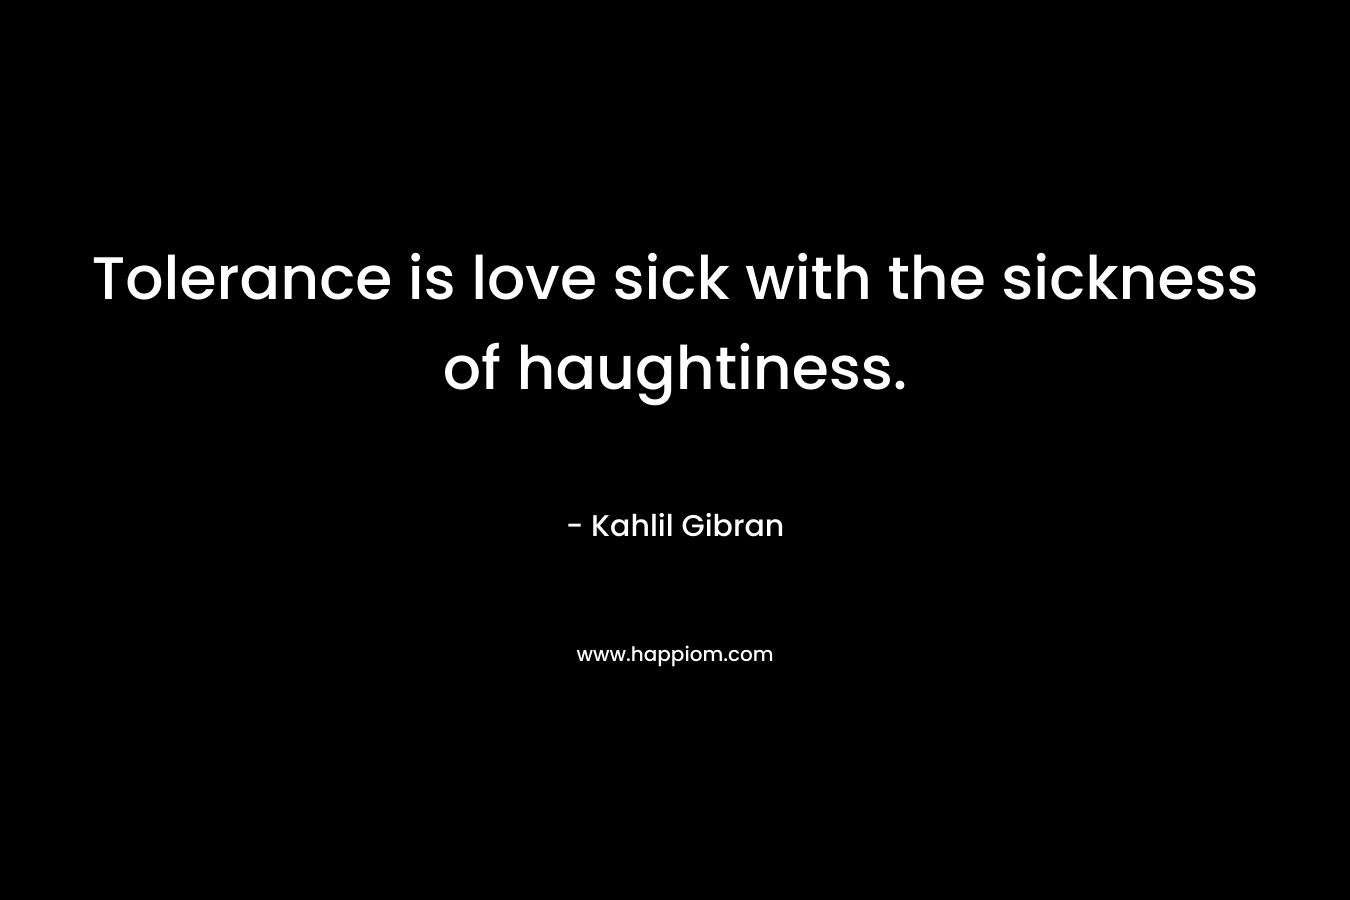 Tolerance is love sick with the sickness of haughtiness.